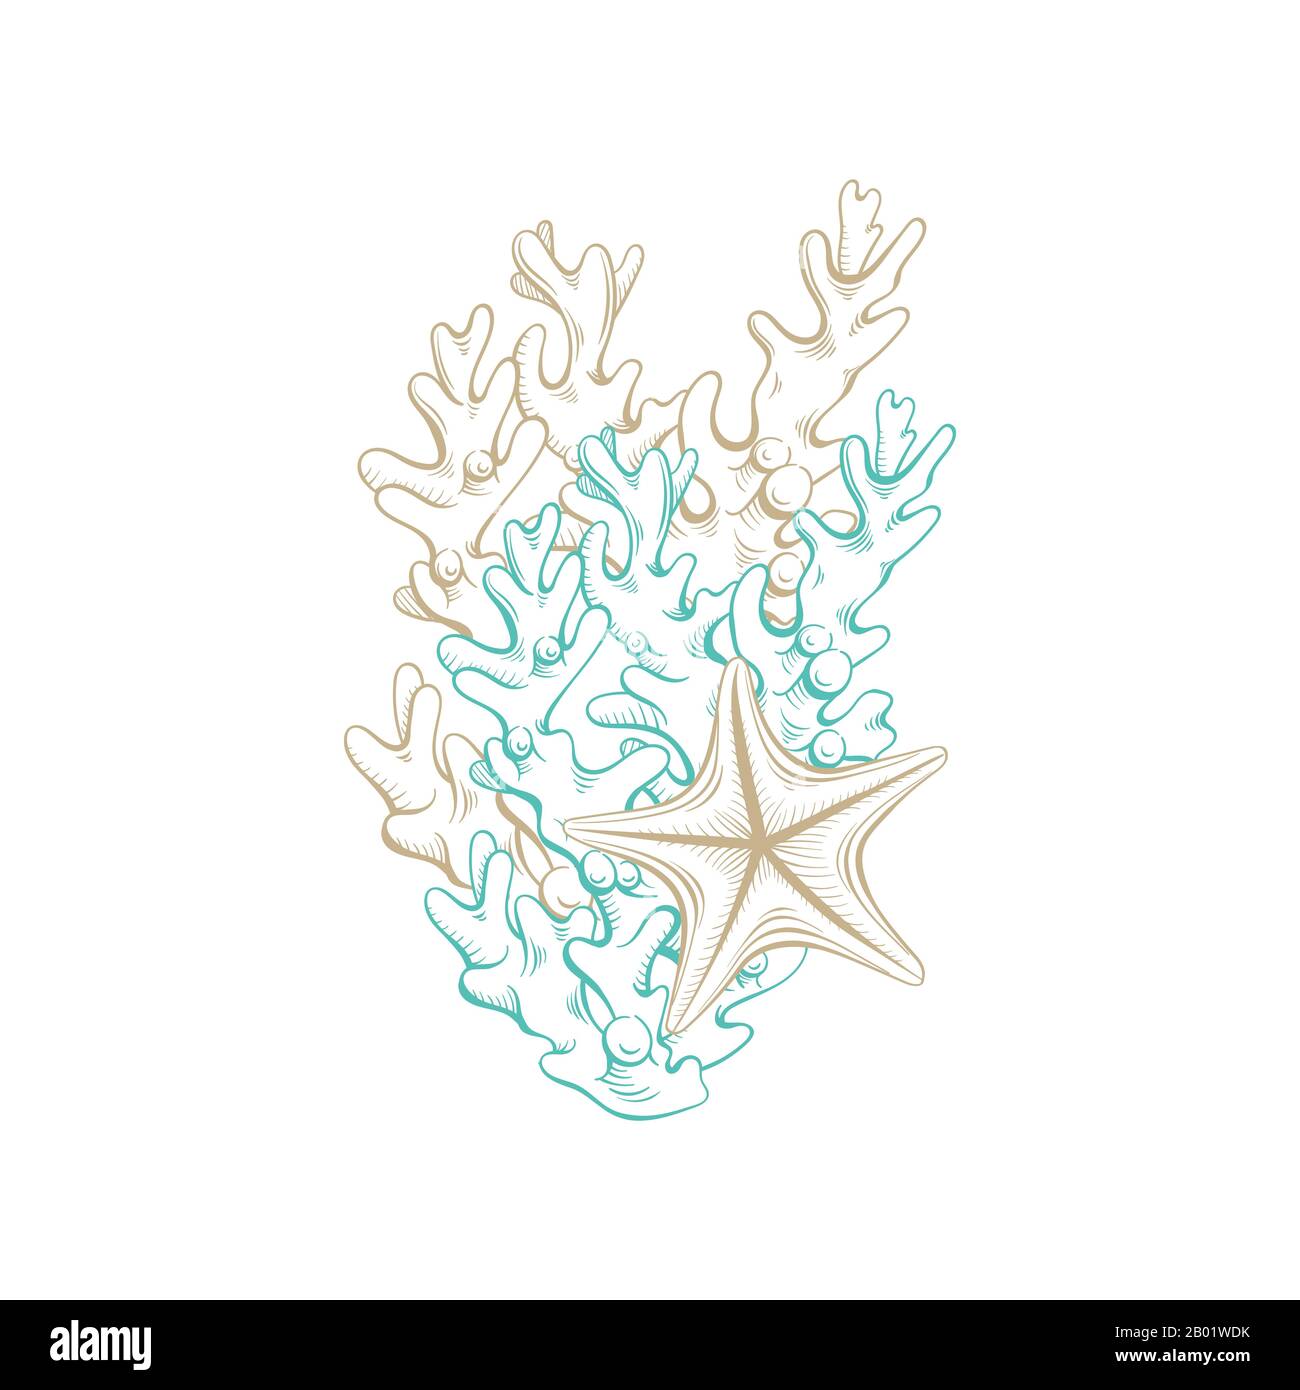 Marine art line composition of ocean corals and sea starfish, vector line art design. Tropical paradise and underwater sea life abstract elements in gold and turquoise color sketch hatching lines Stock Vector